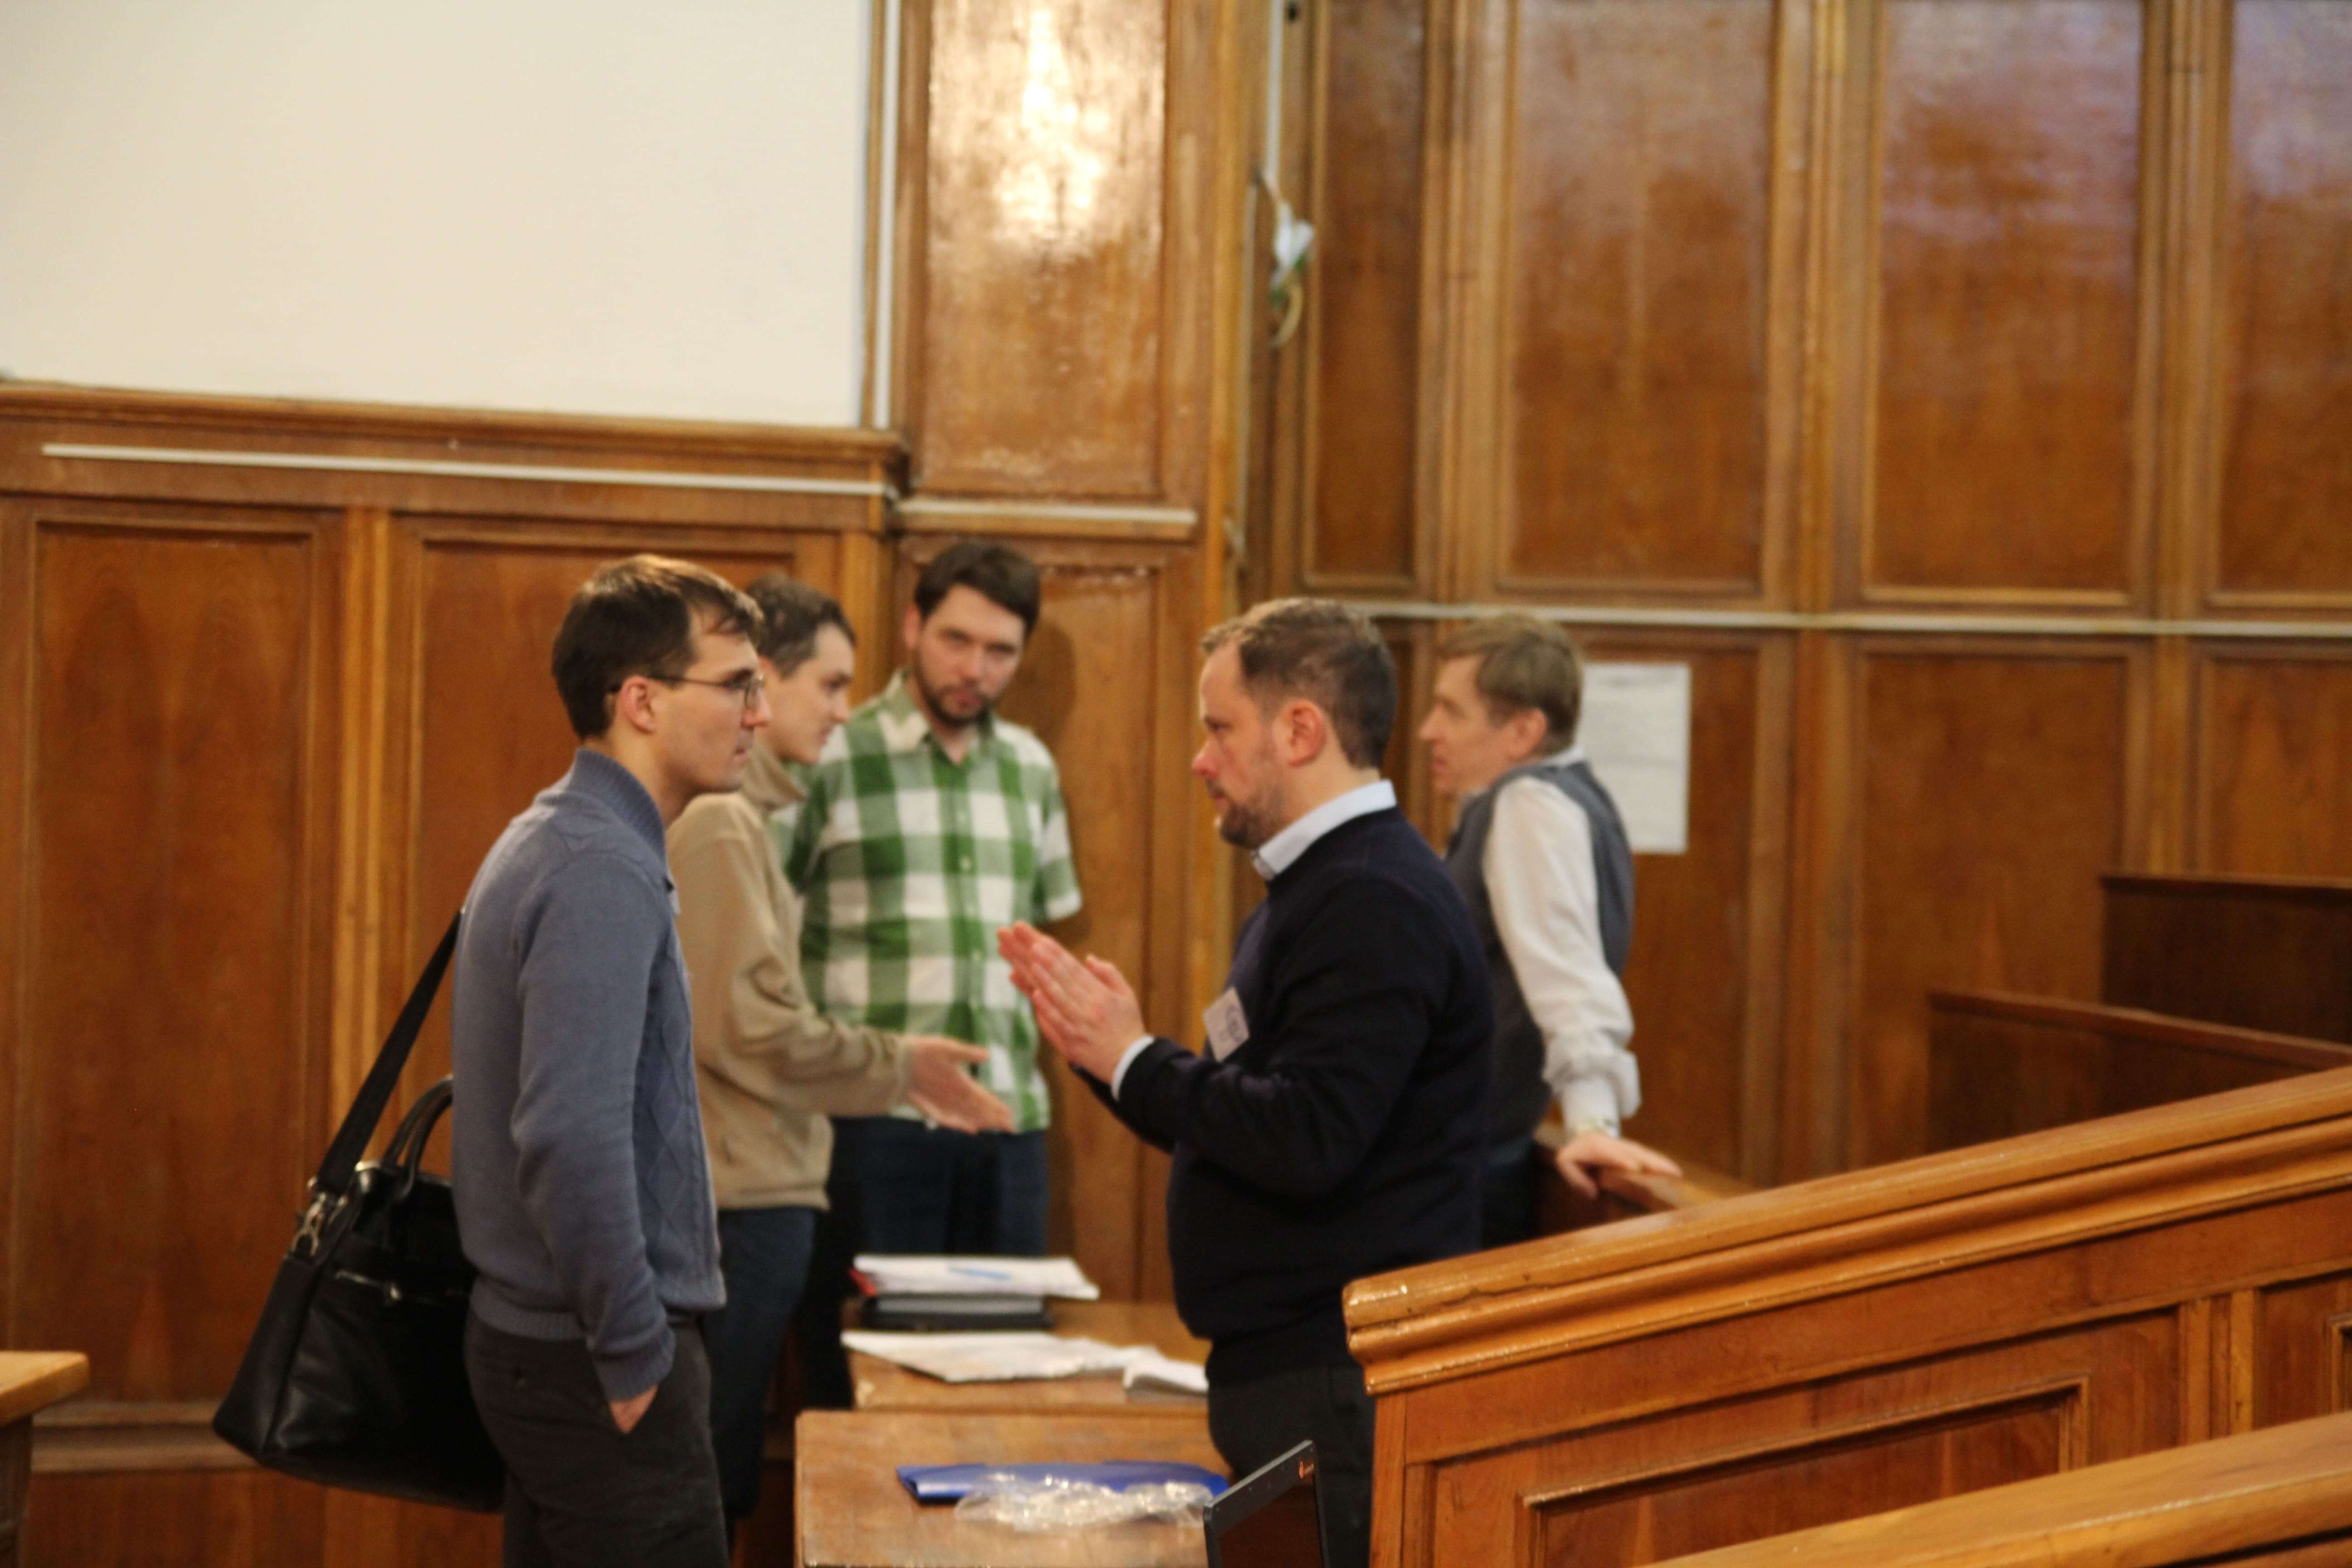 Ivan Arzhantsev and Sergey Gaifullin at VI school-conference "Lie algebras, algebraic groups and invariant theory", MSU, Moscow, January 2017